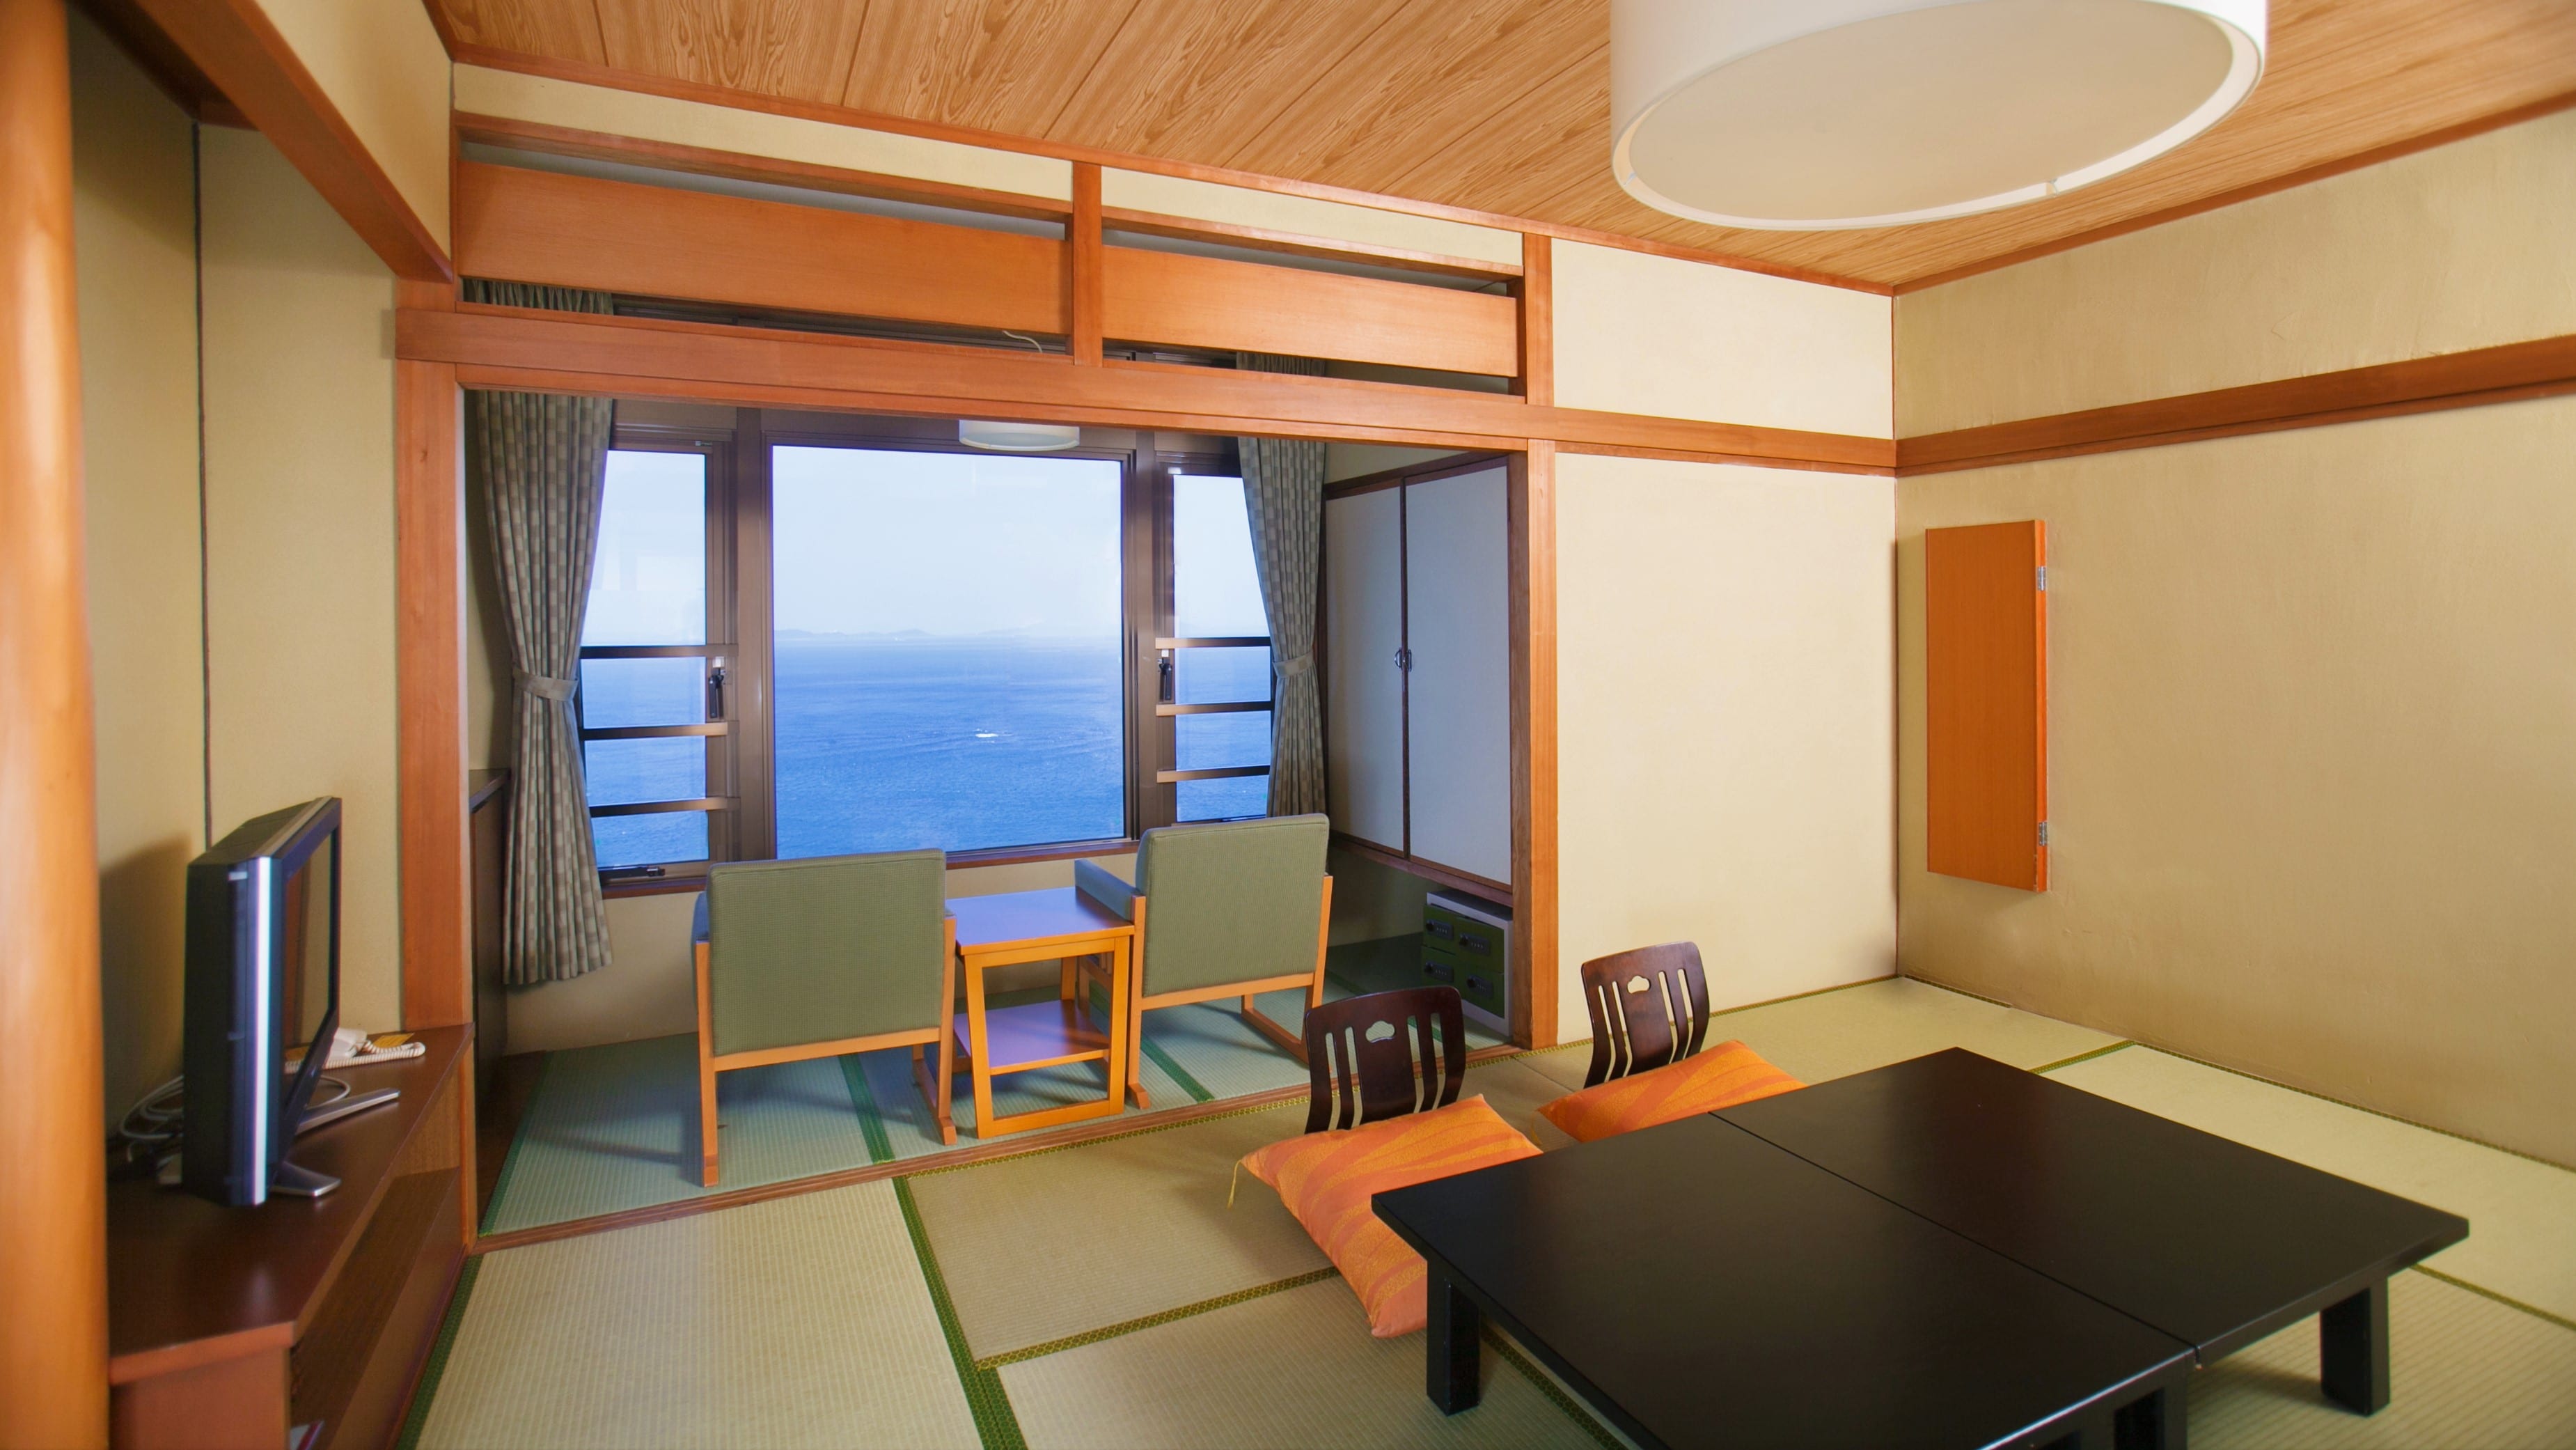 [Main building] Japanese-style room on the sea side